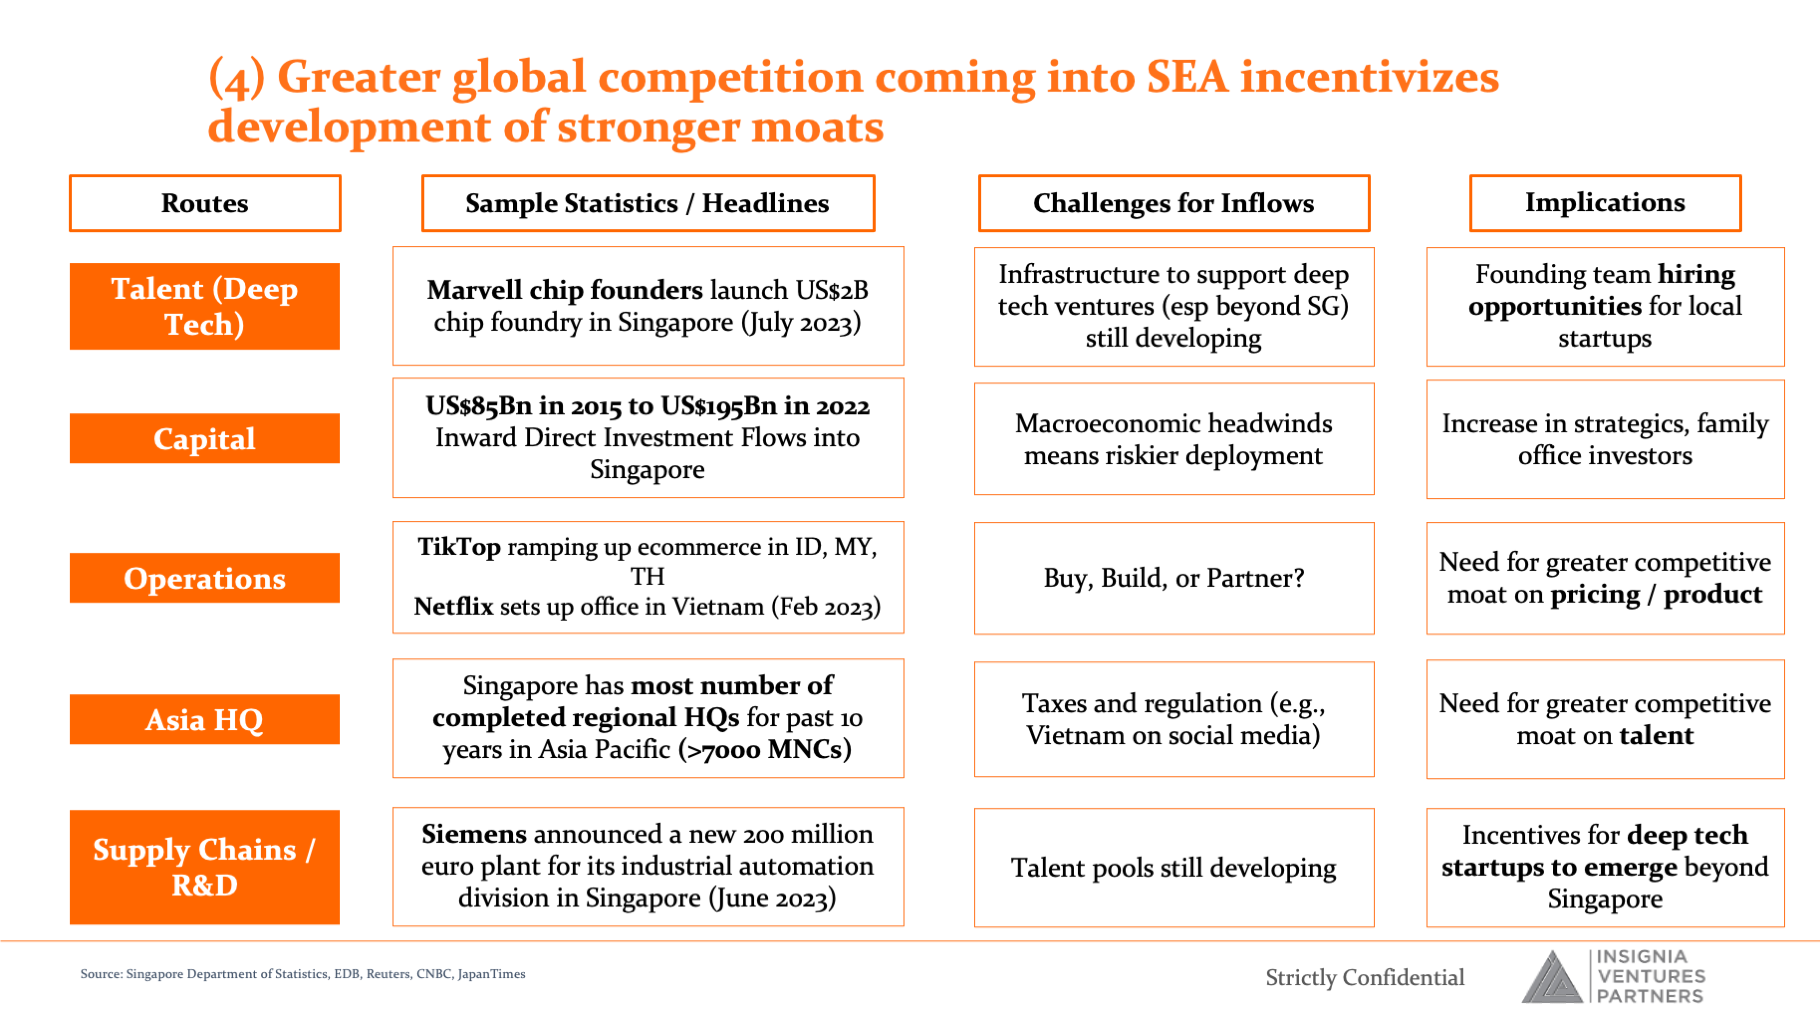 Greater global competition coming into SEA incentivizes development of stronger moats